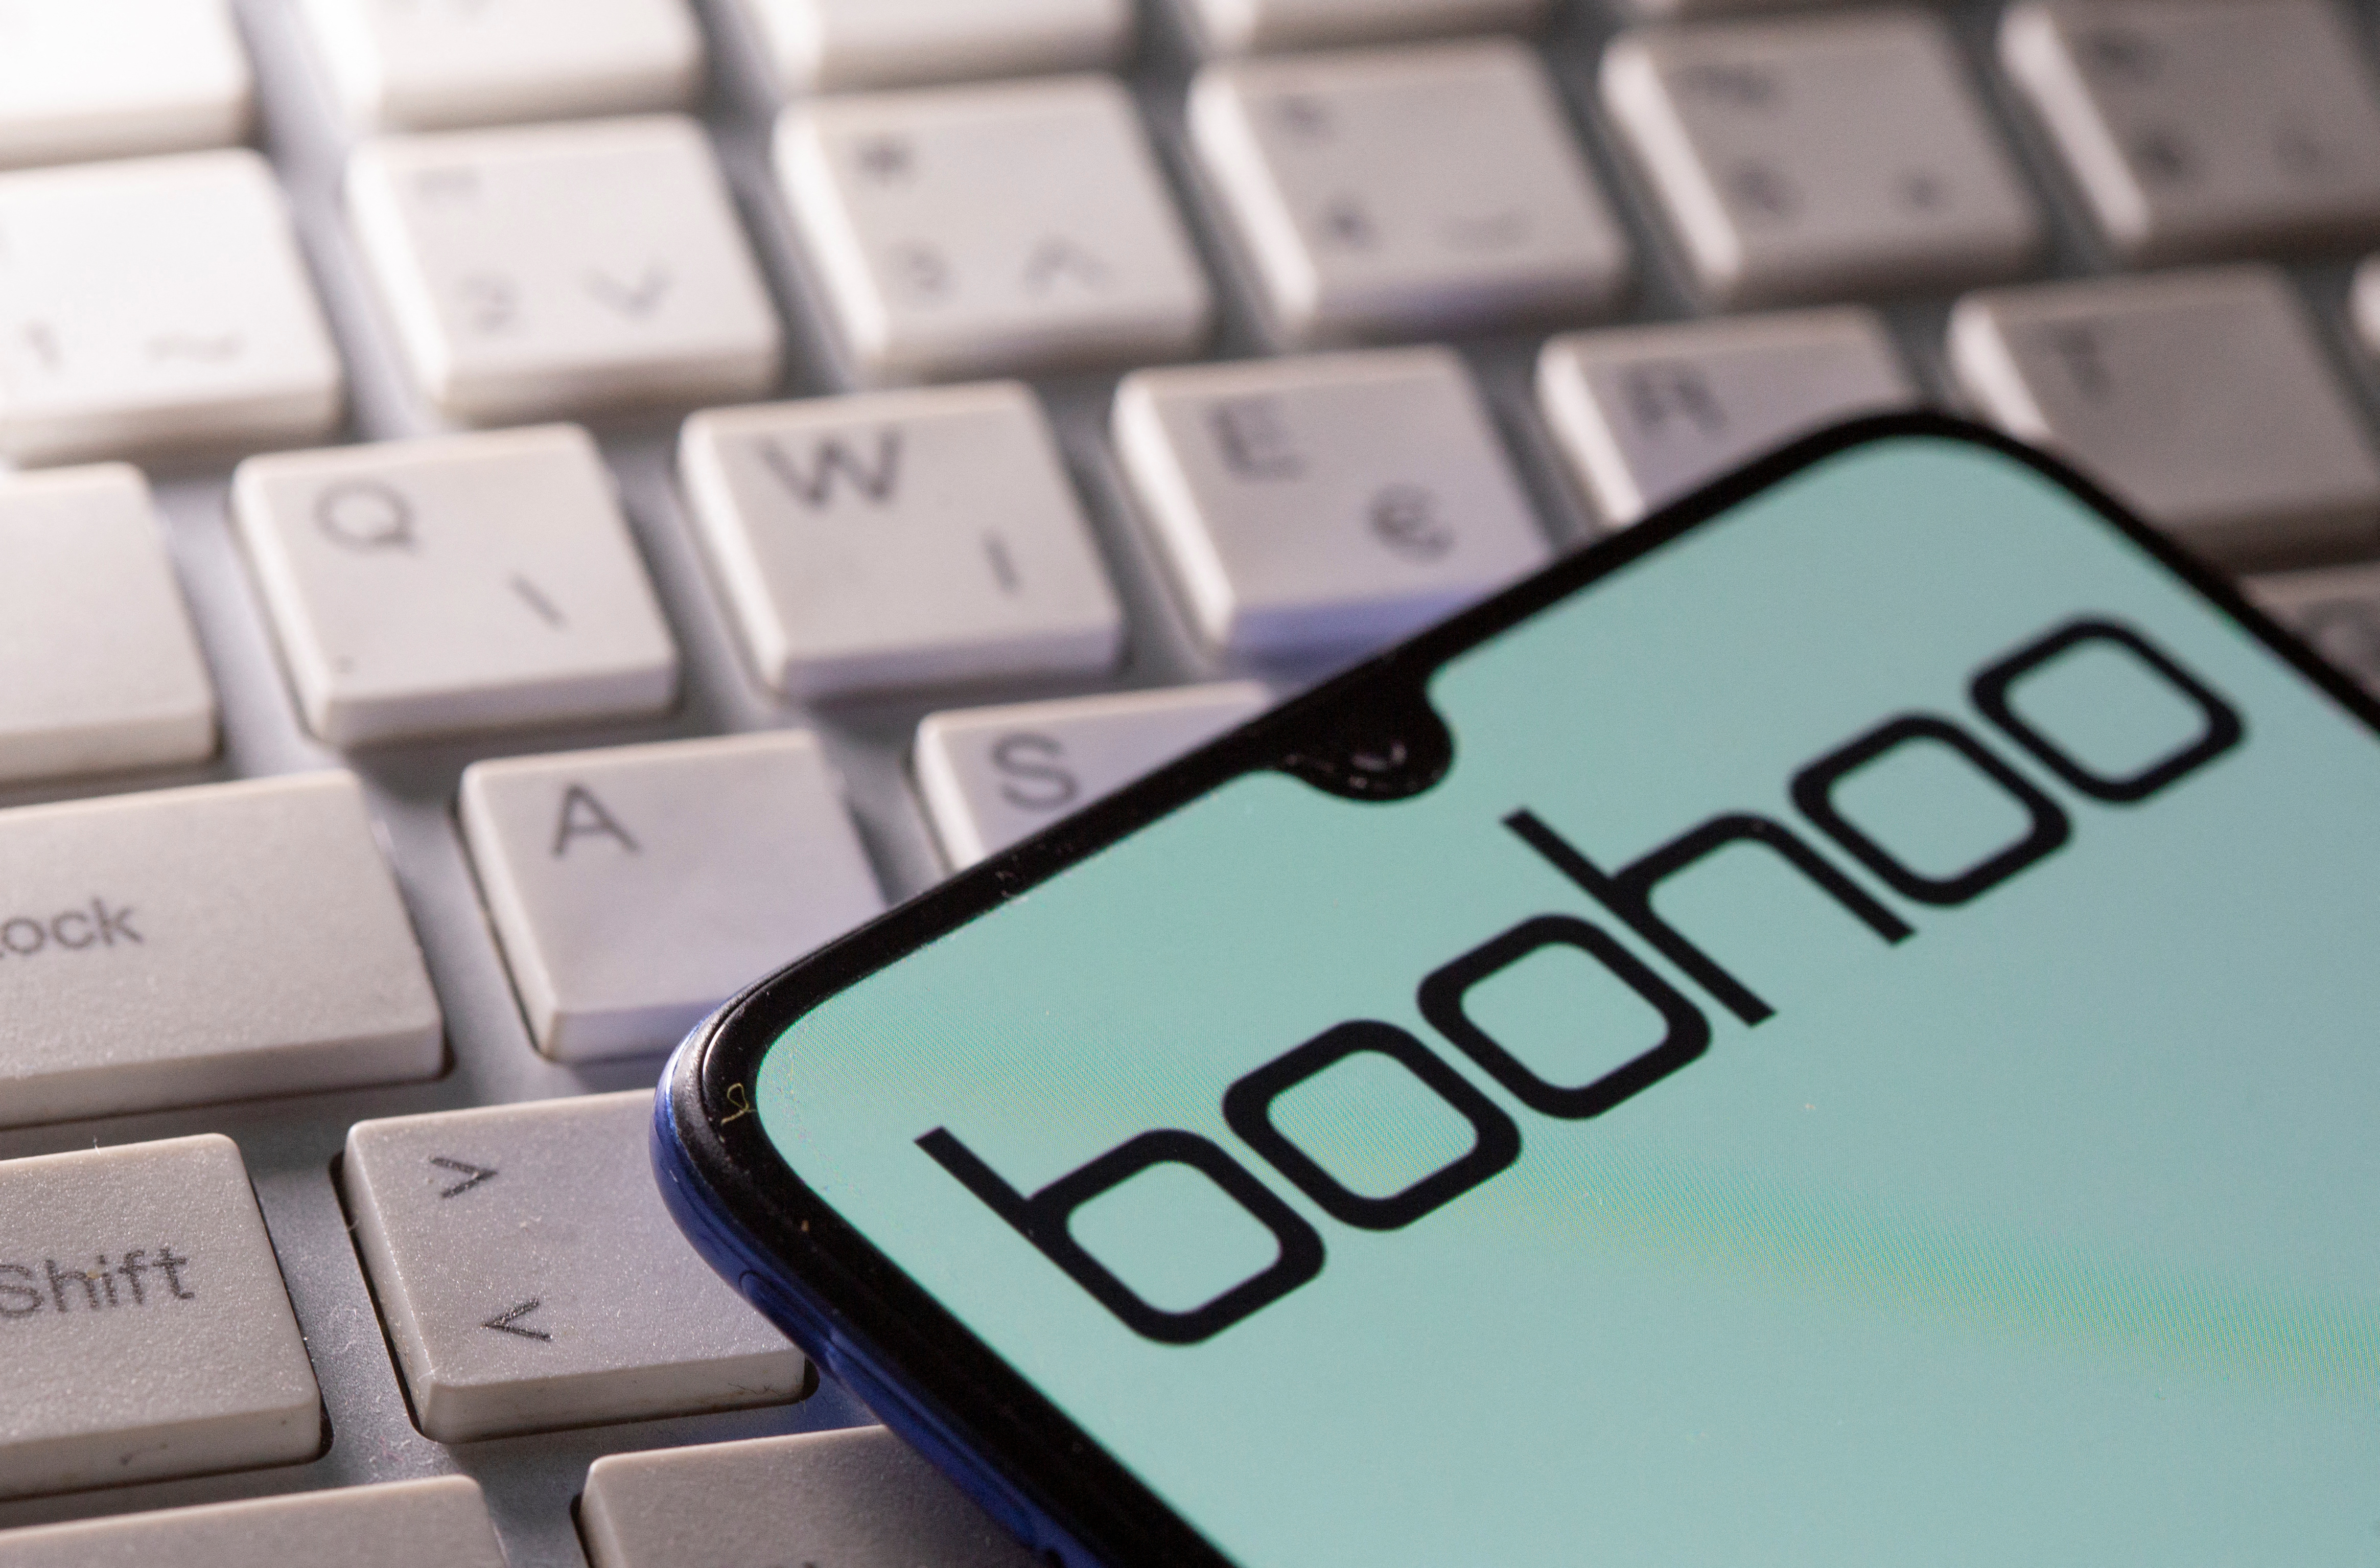 A smartphone with the Boohoo logo displayed is seen on a keyboard in this illustration